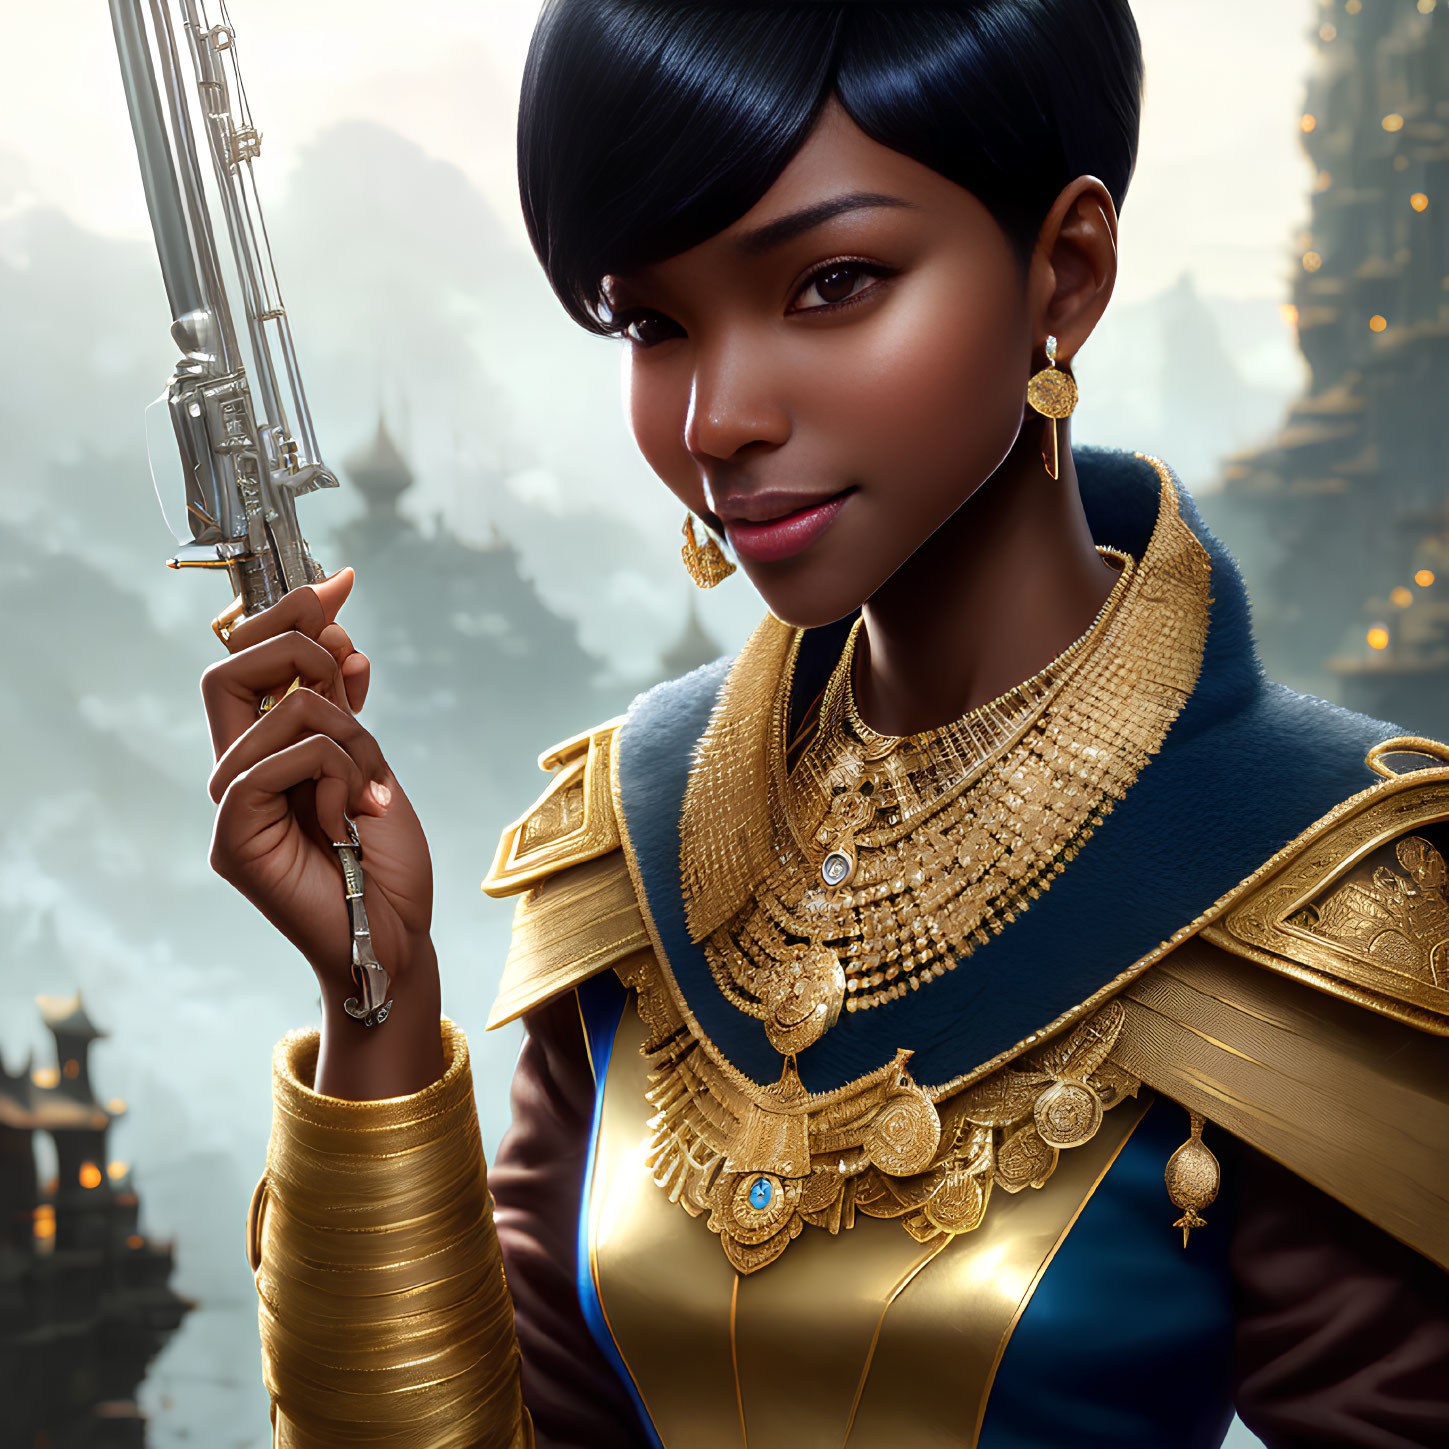 Digital artwork: Woman with short hair holding futuristic sword in ornate outfit.